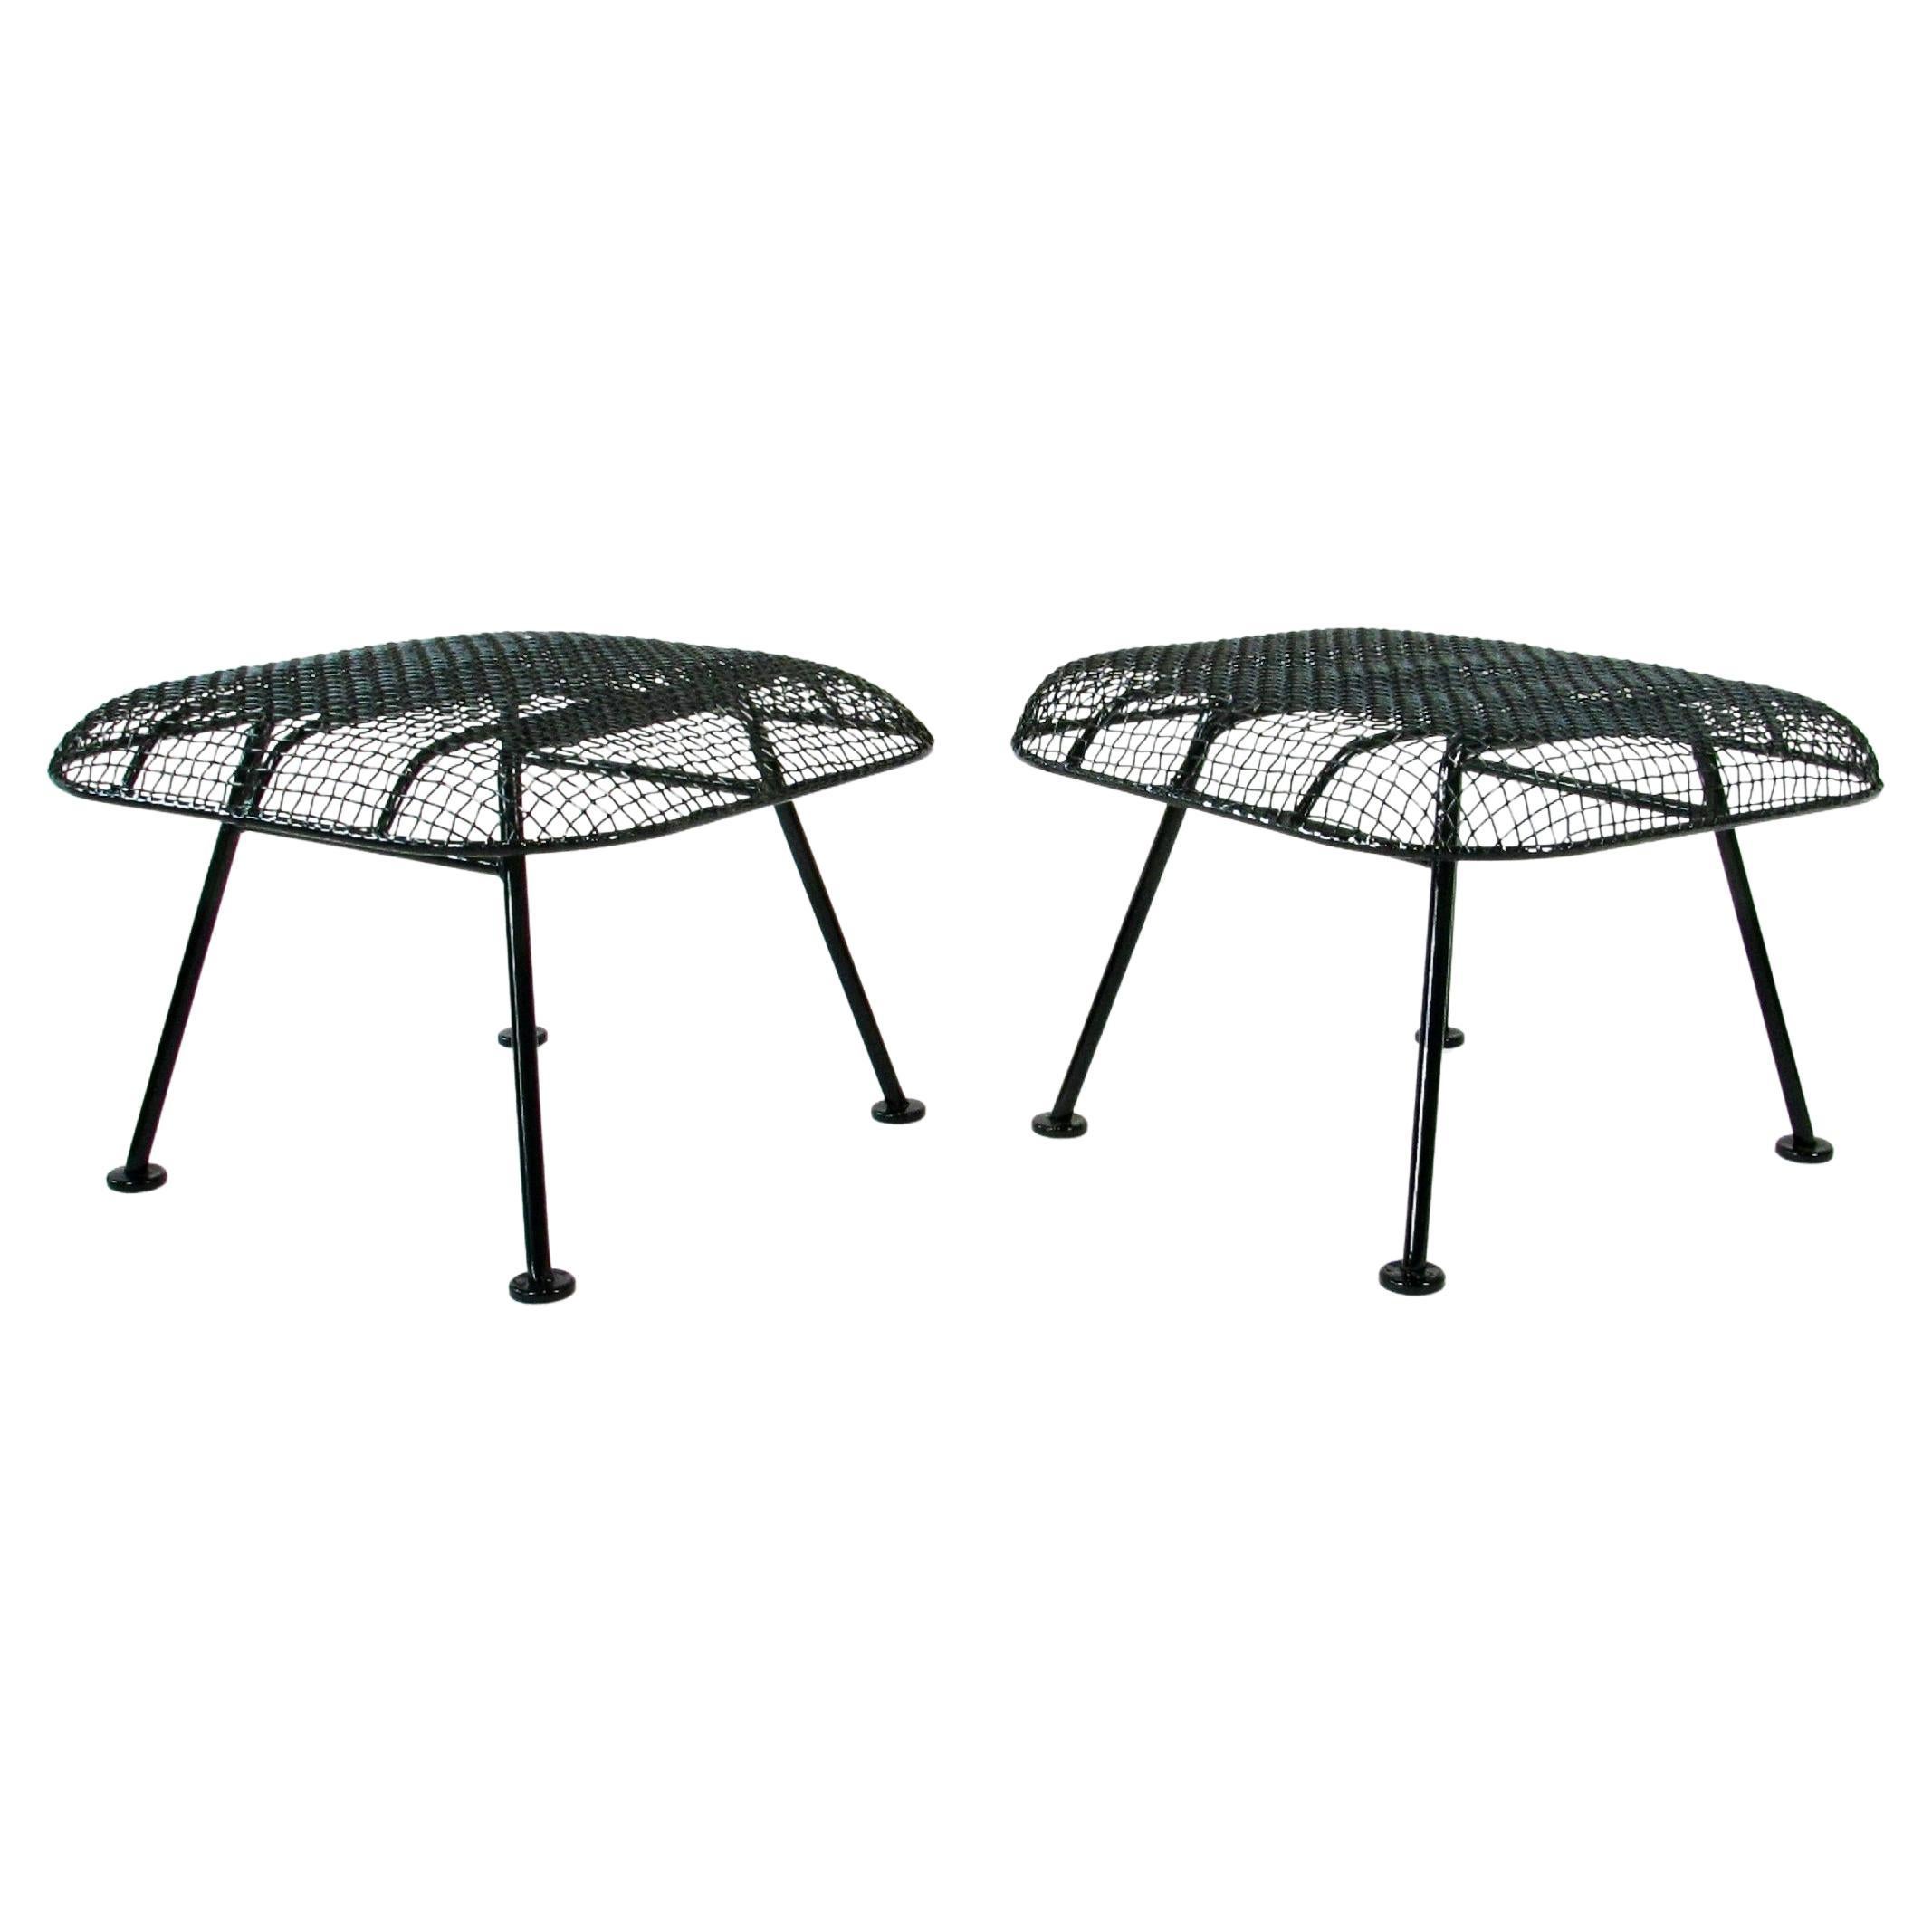 Pair of Woodard Wrought Iron with Steel Mesh Ottomans